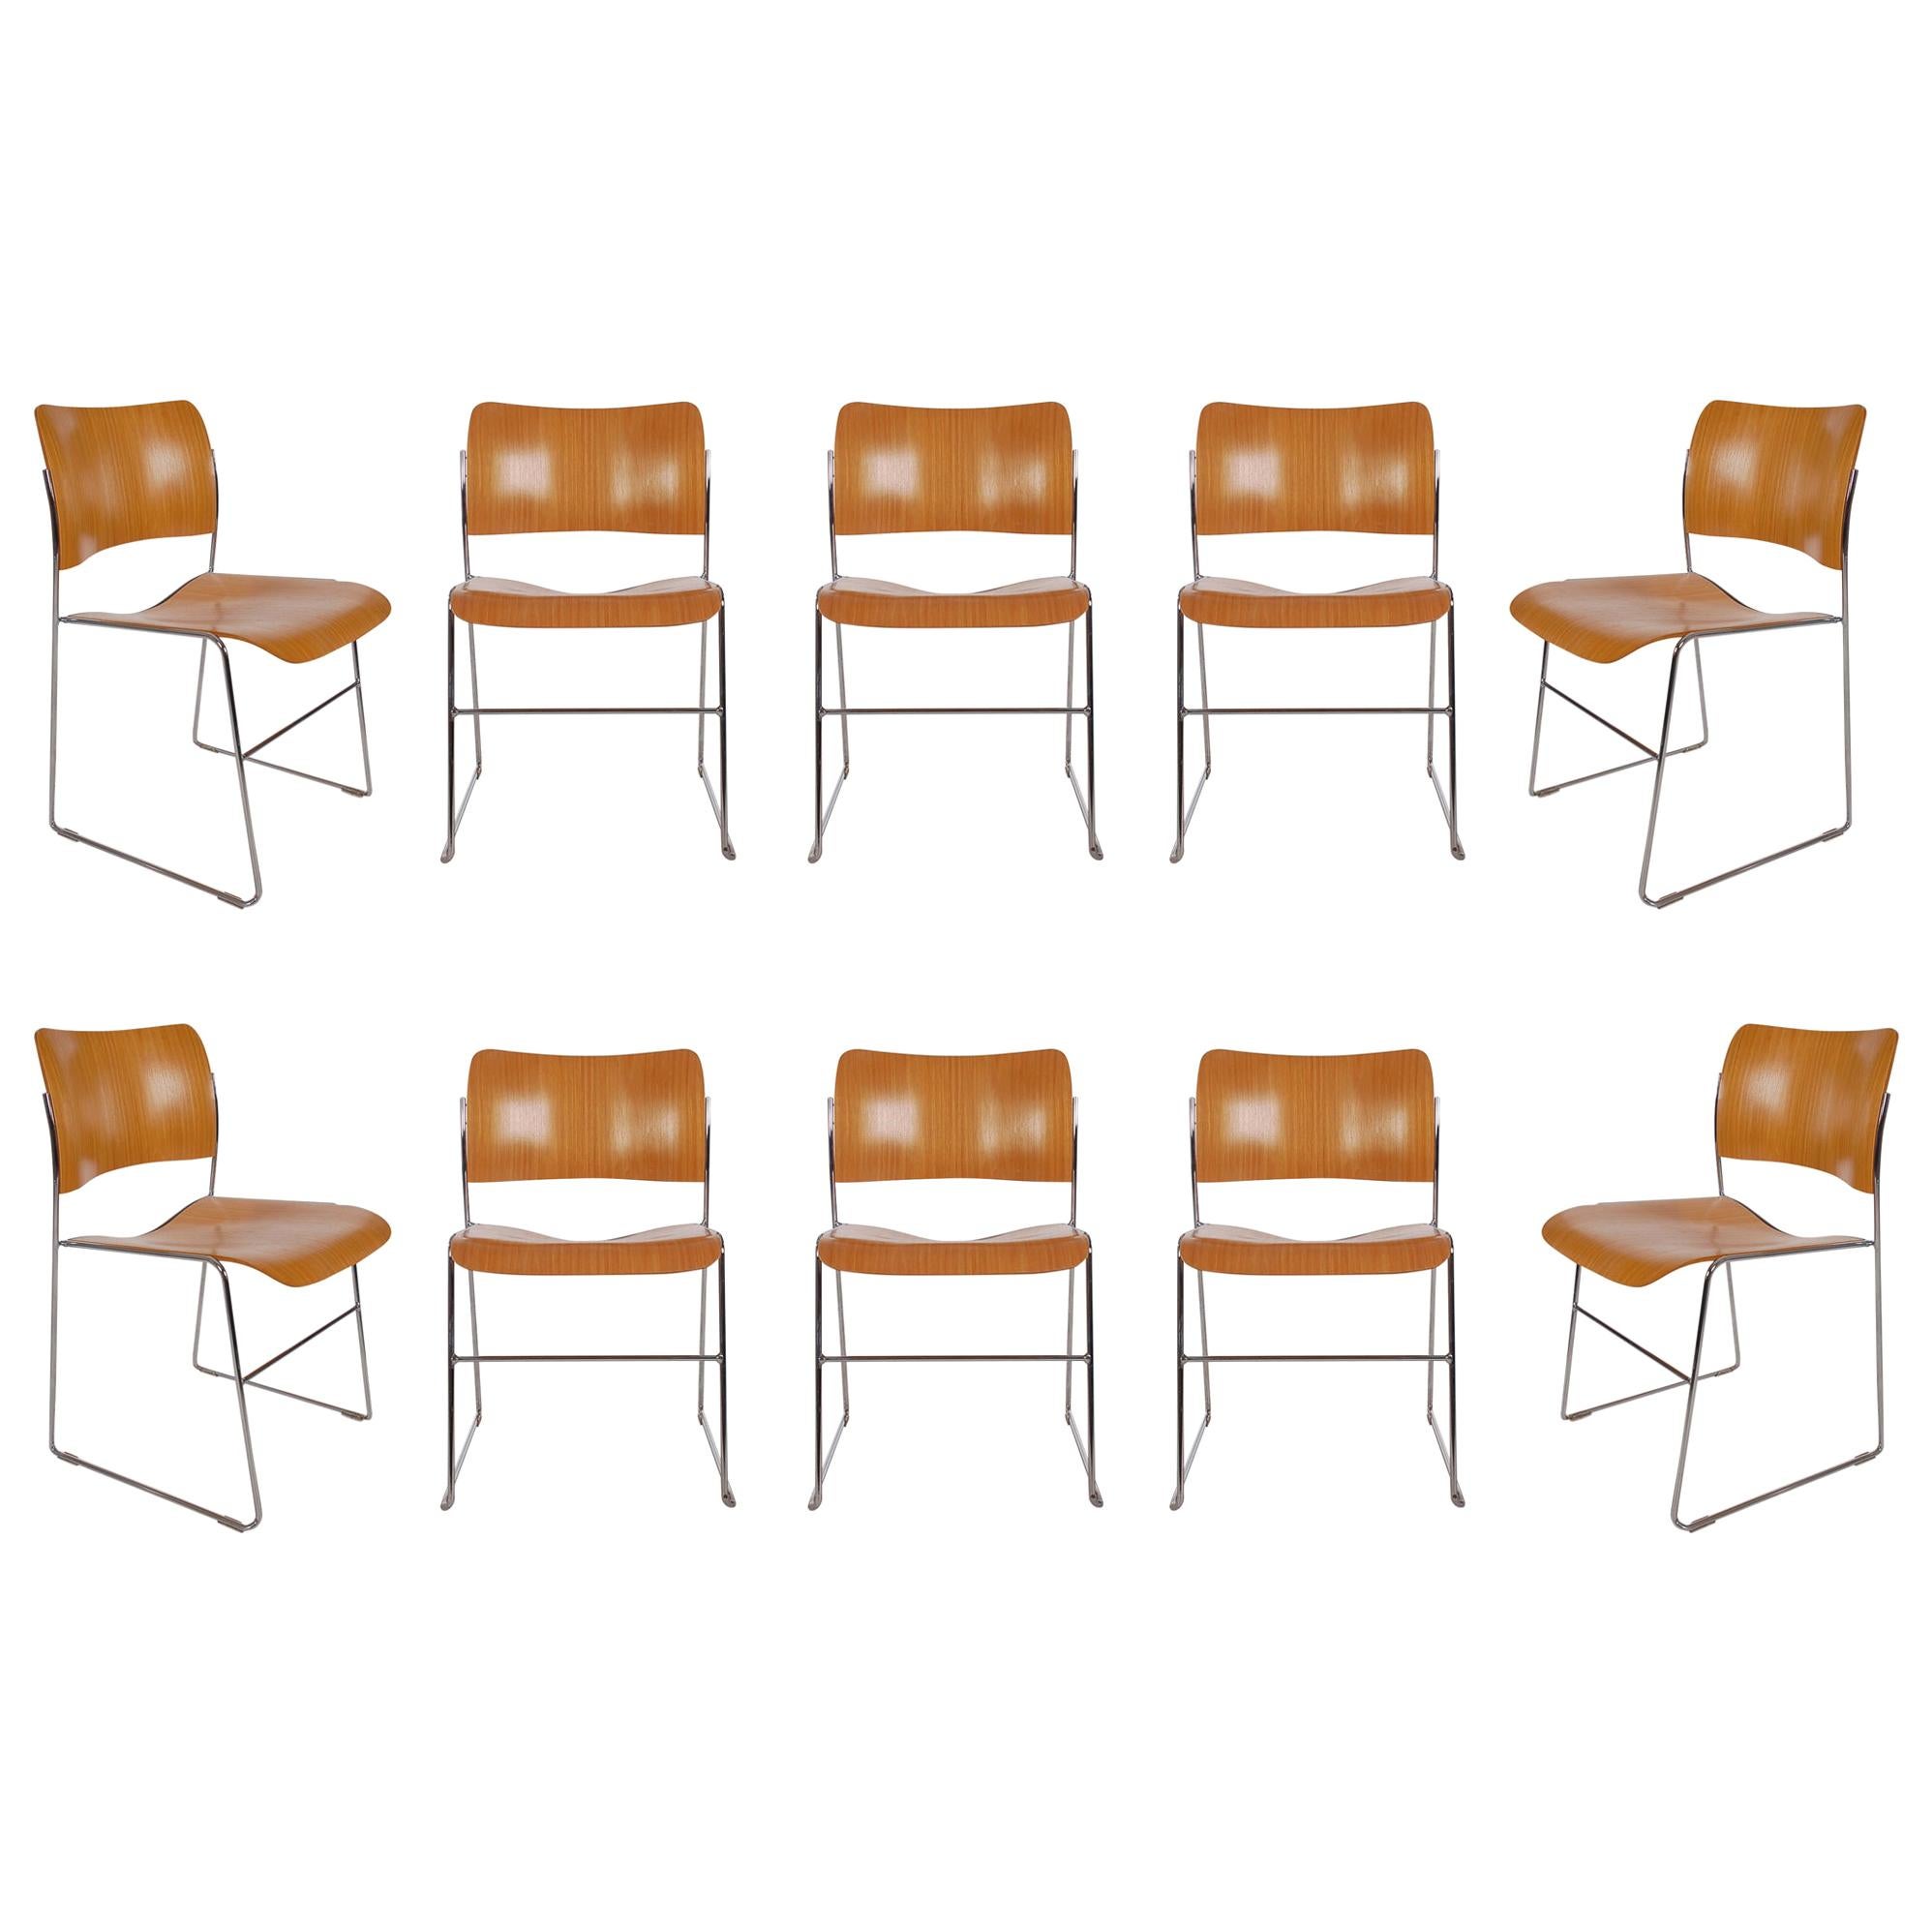 Eight Mid-Century Modern Bentwood Stackable Dining Chairs 40/4 by David Rowland